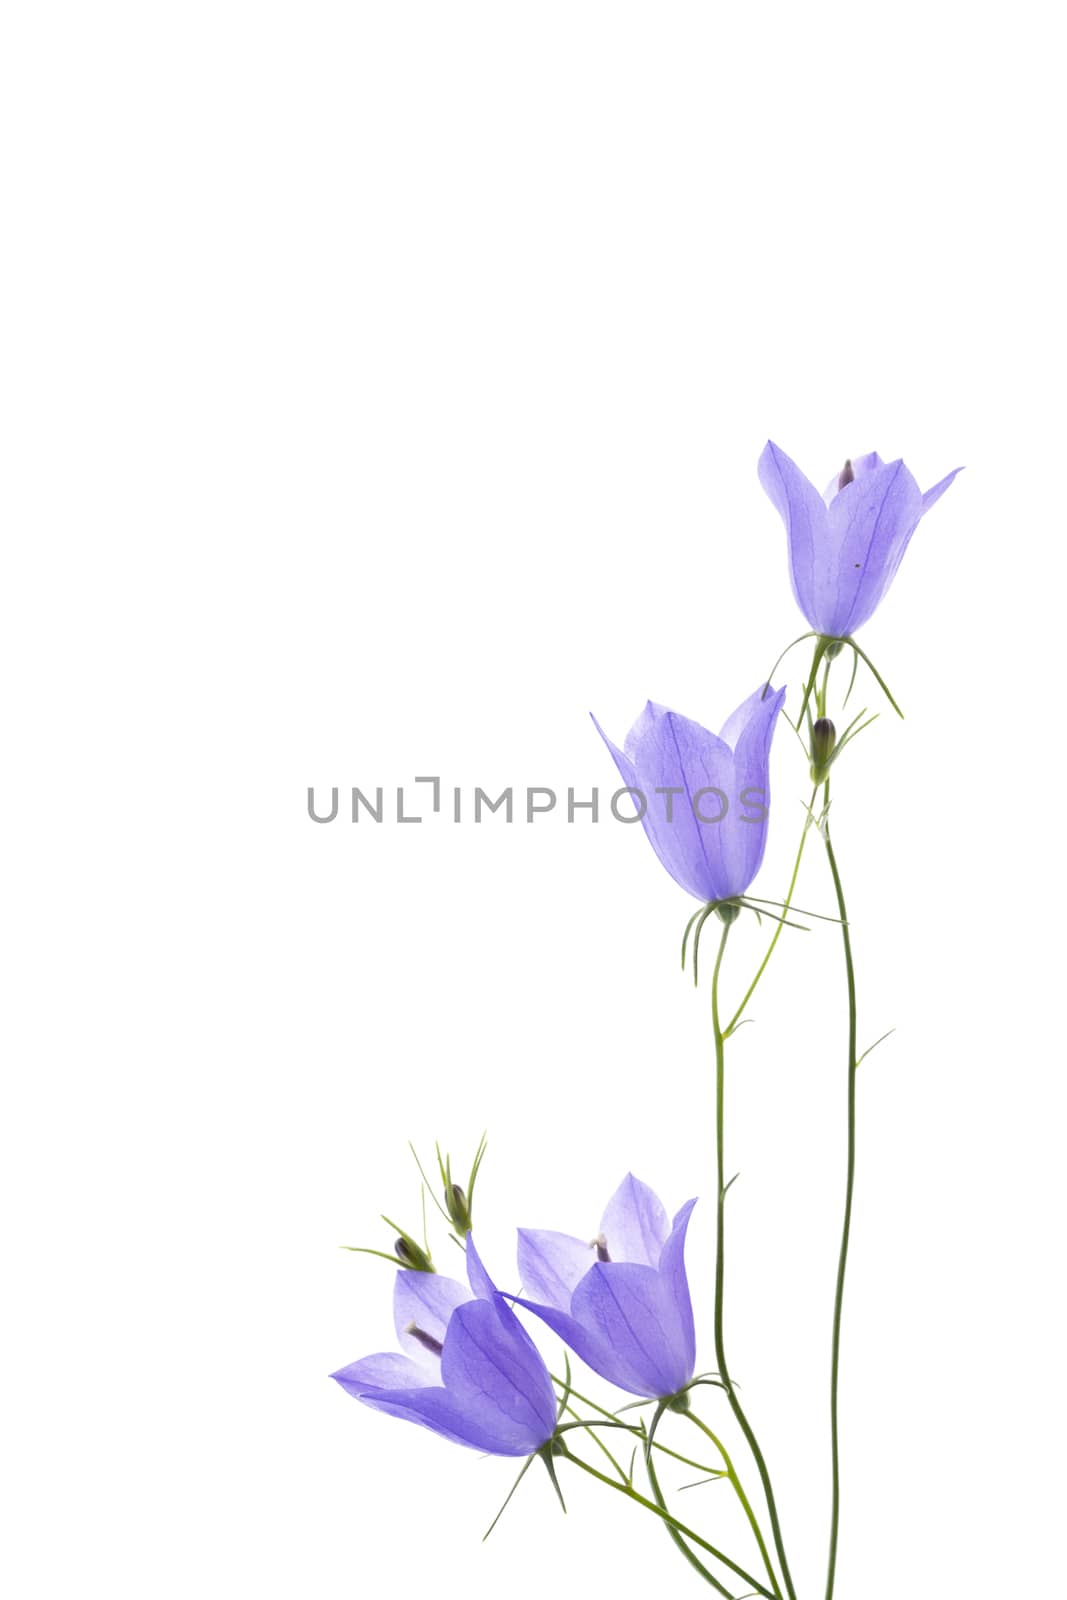 blue flowers bell isolated on white background.